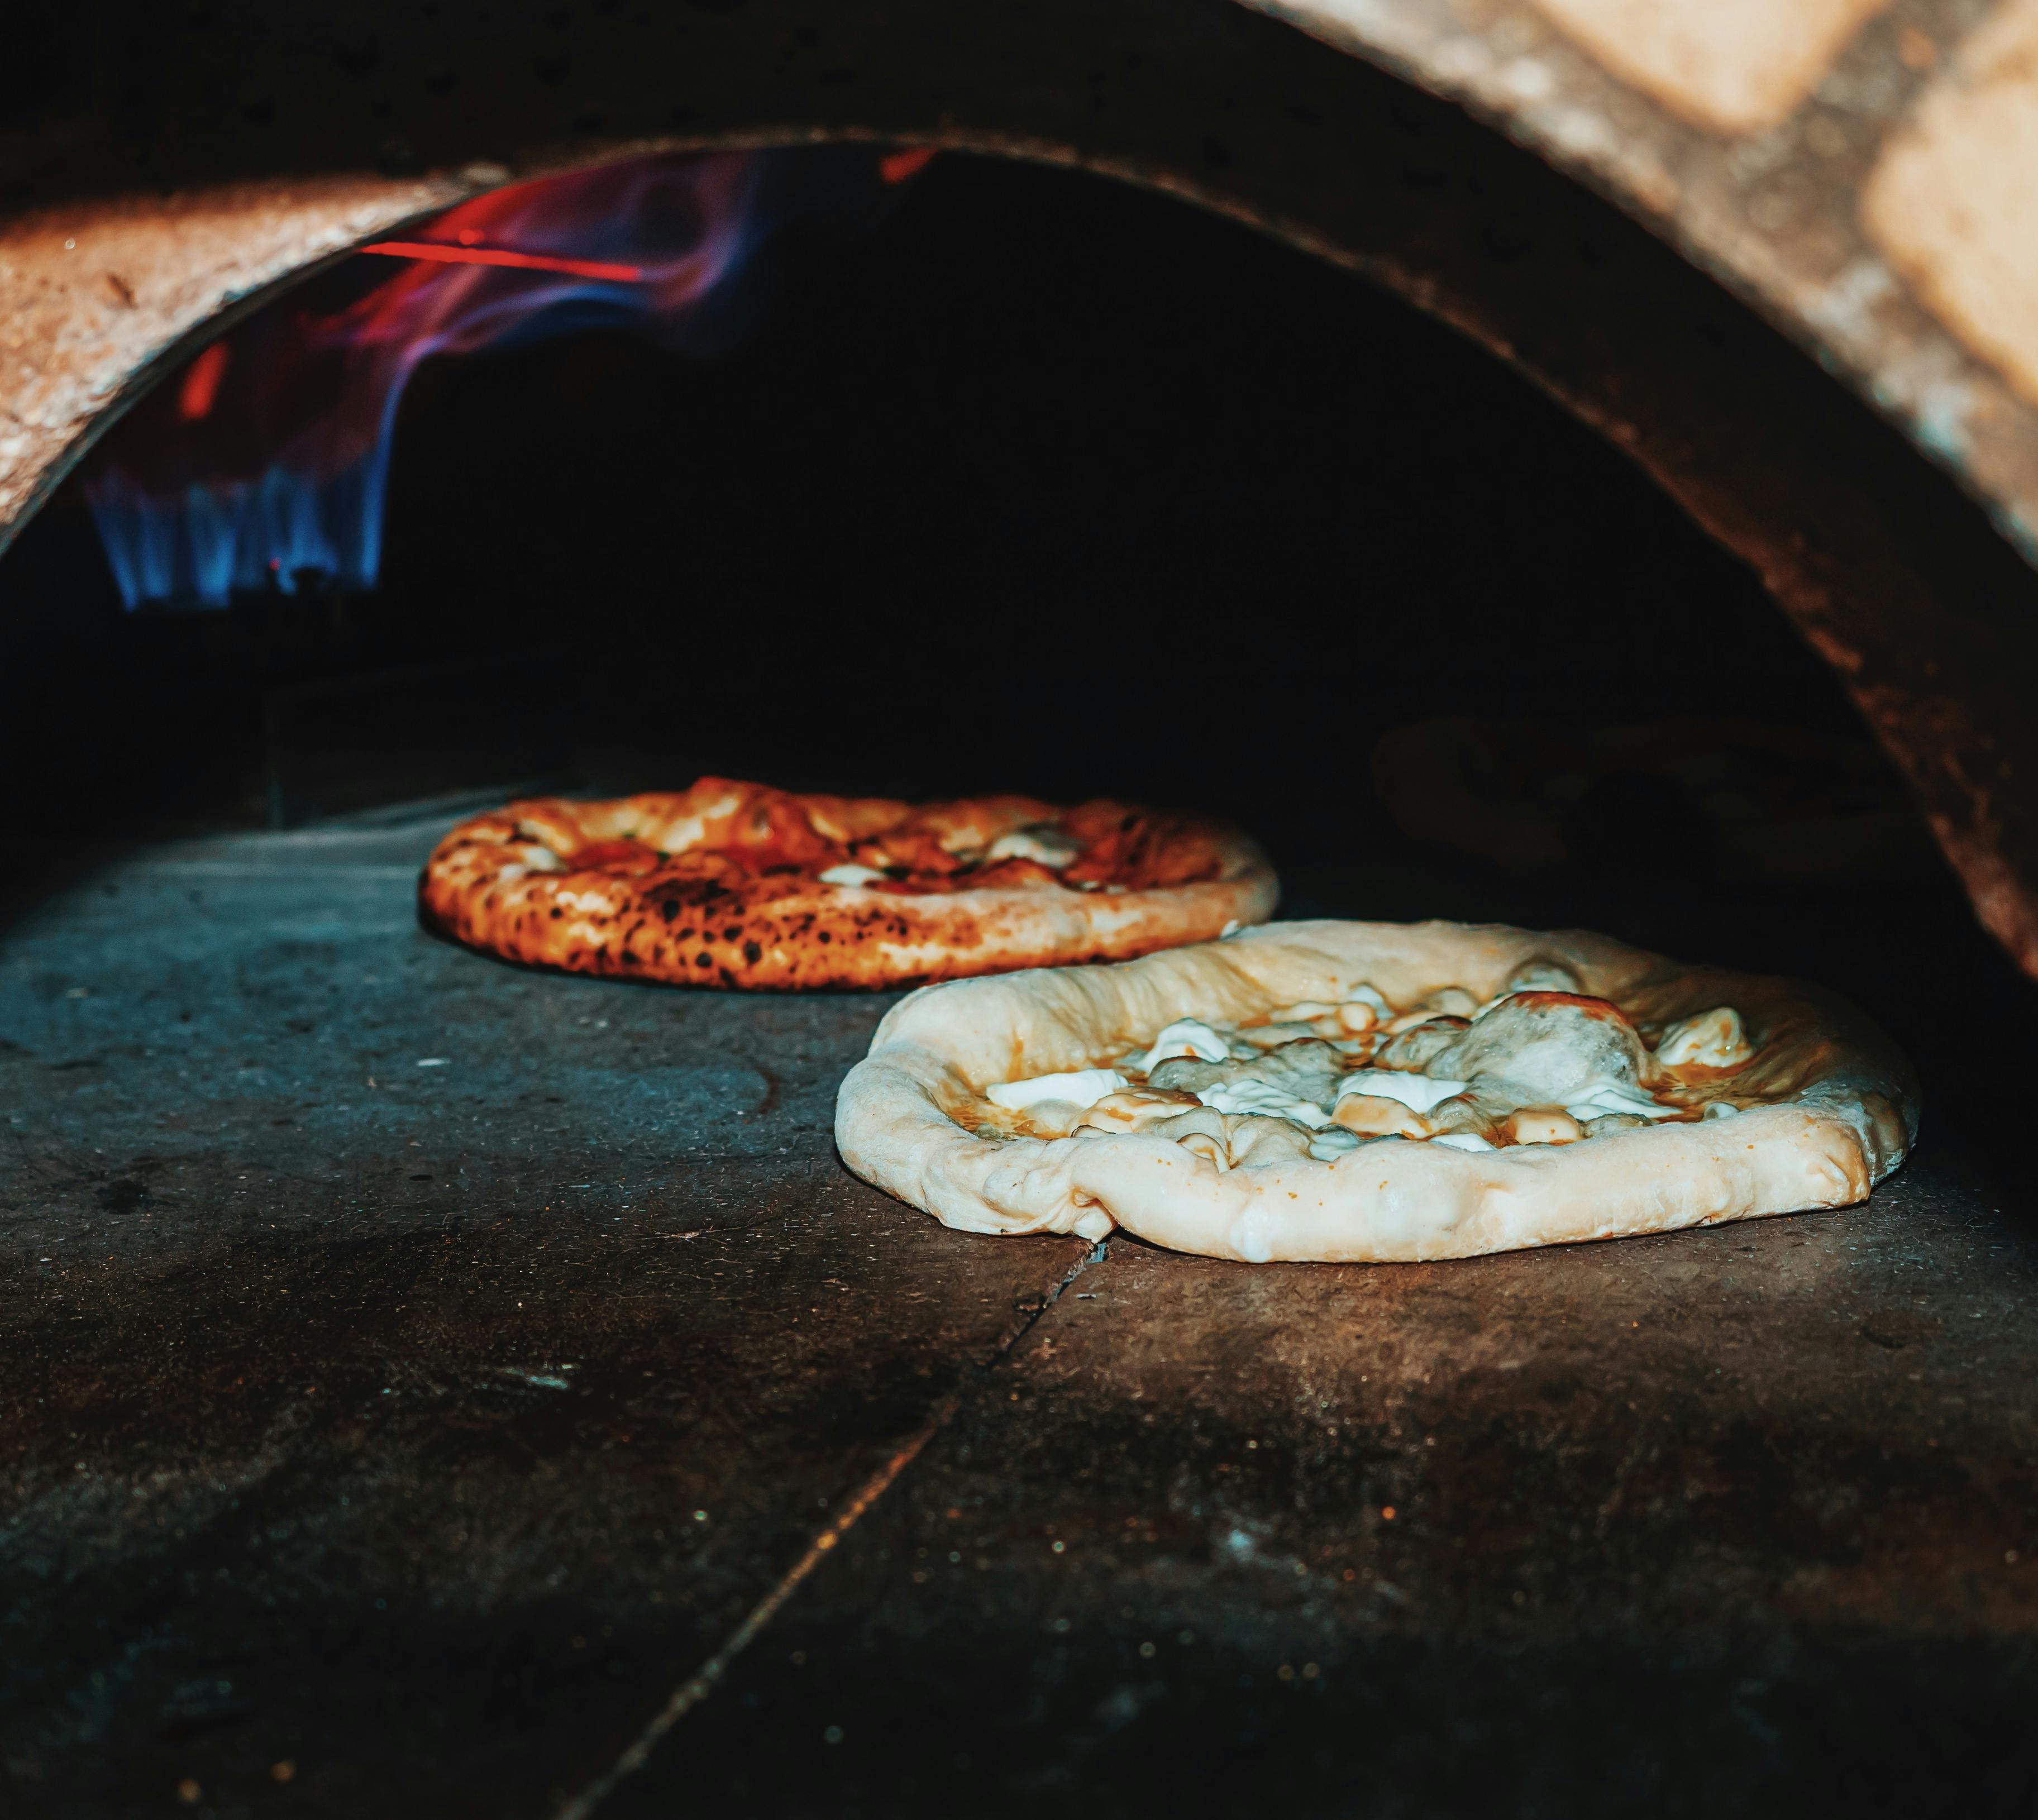 Two pizzas cooking in the 800 degree brick oven